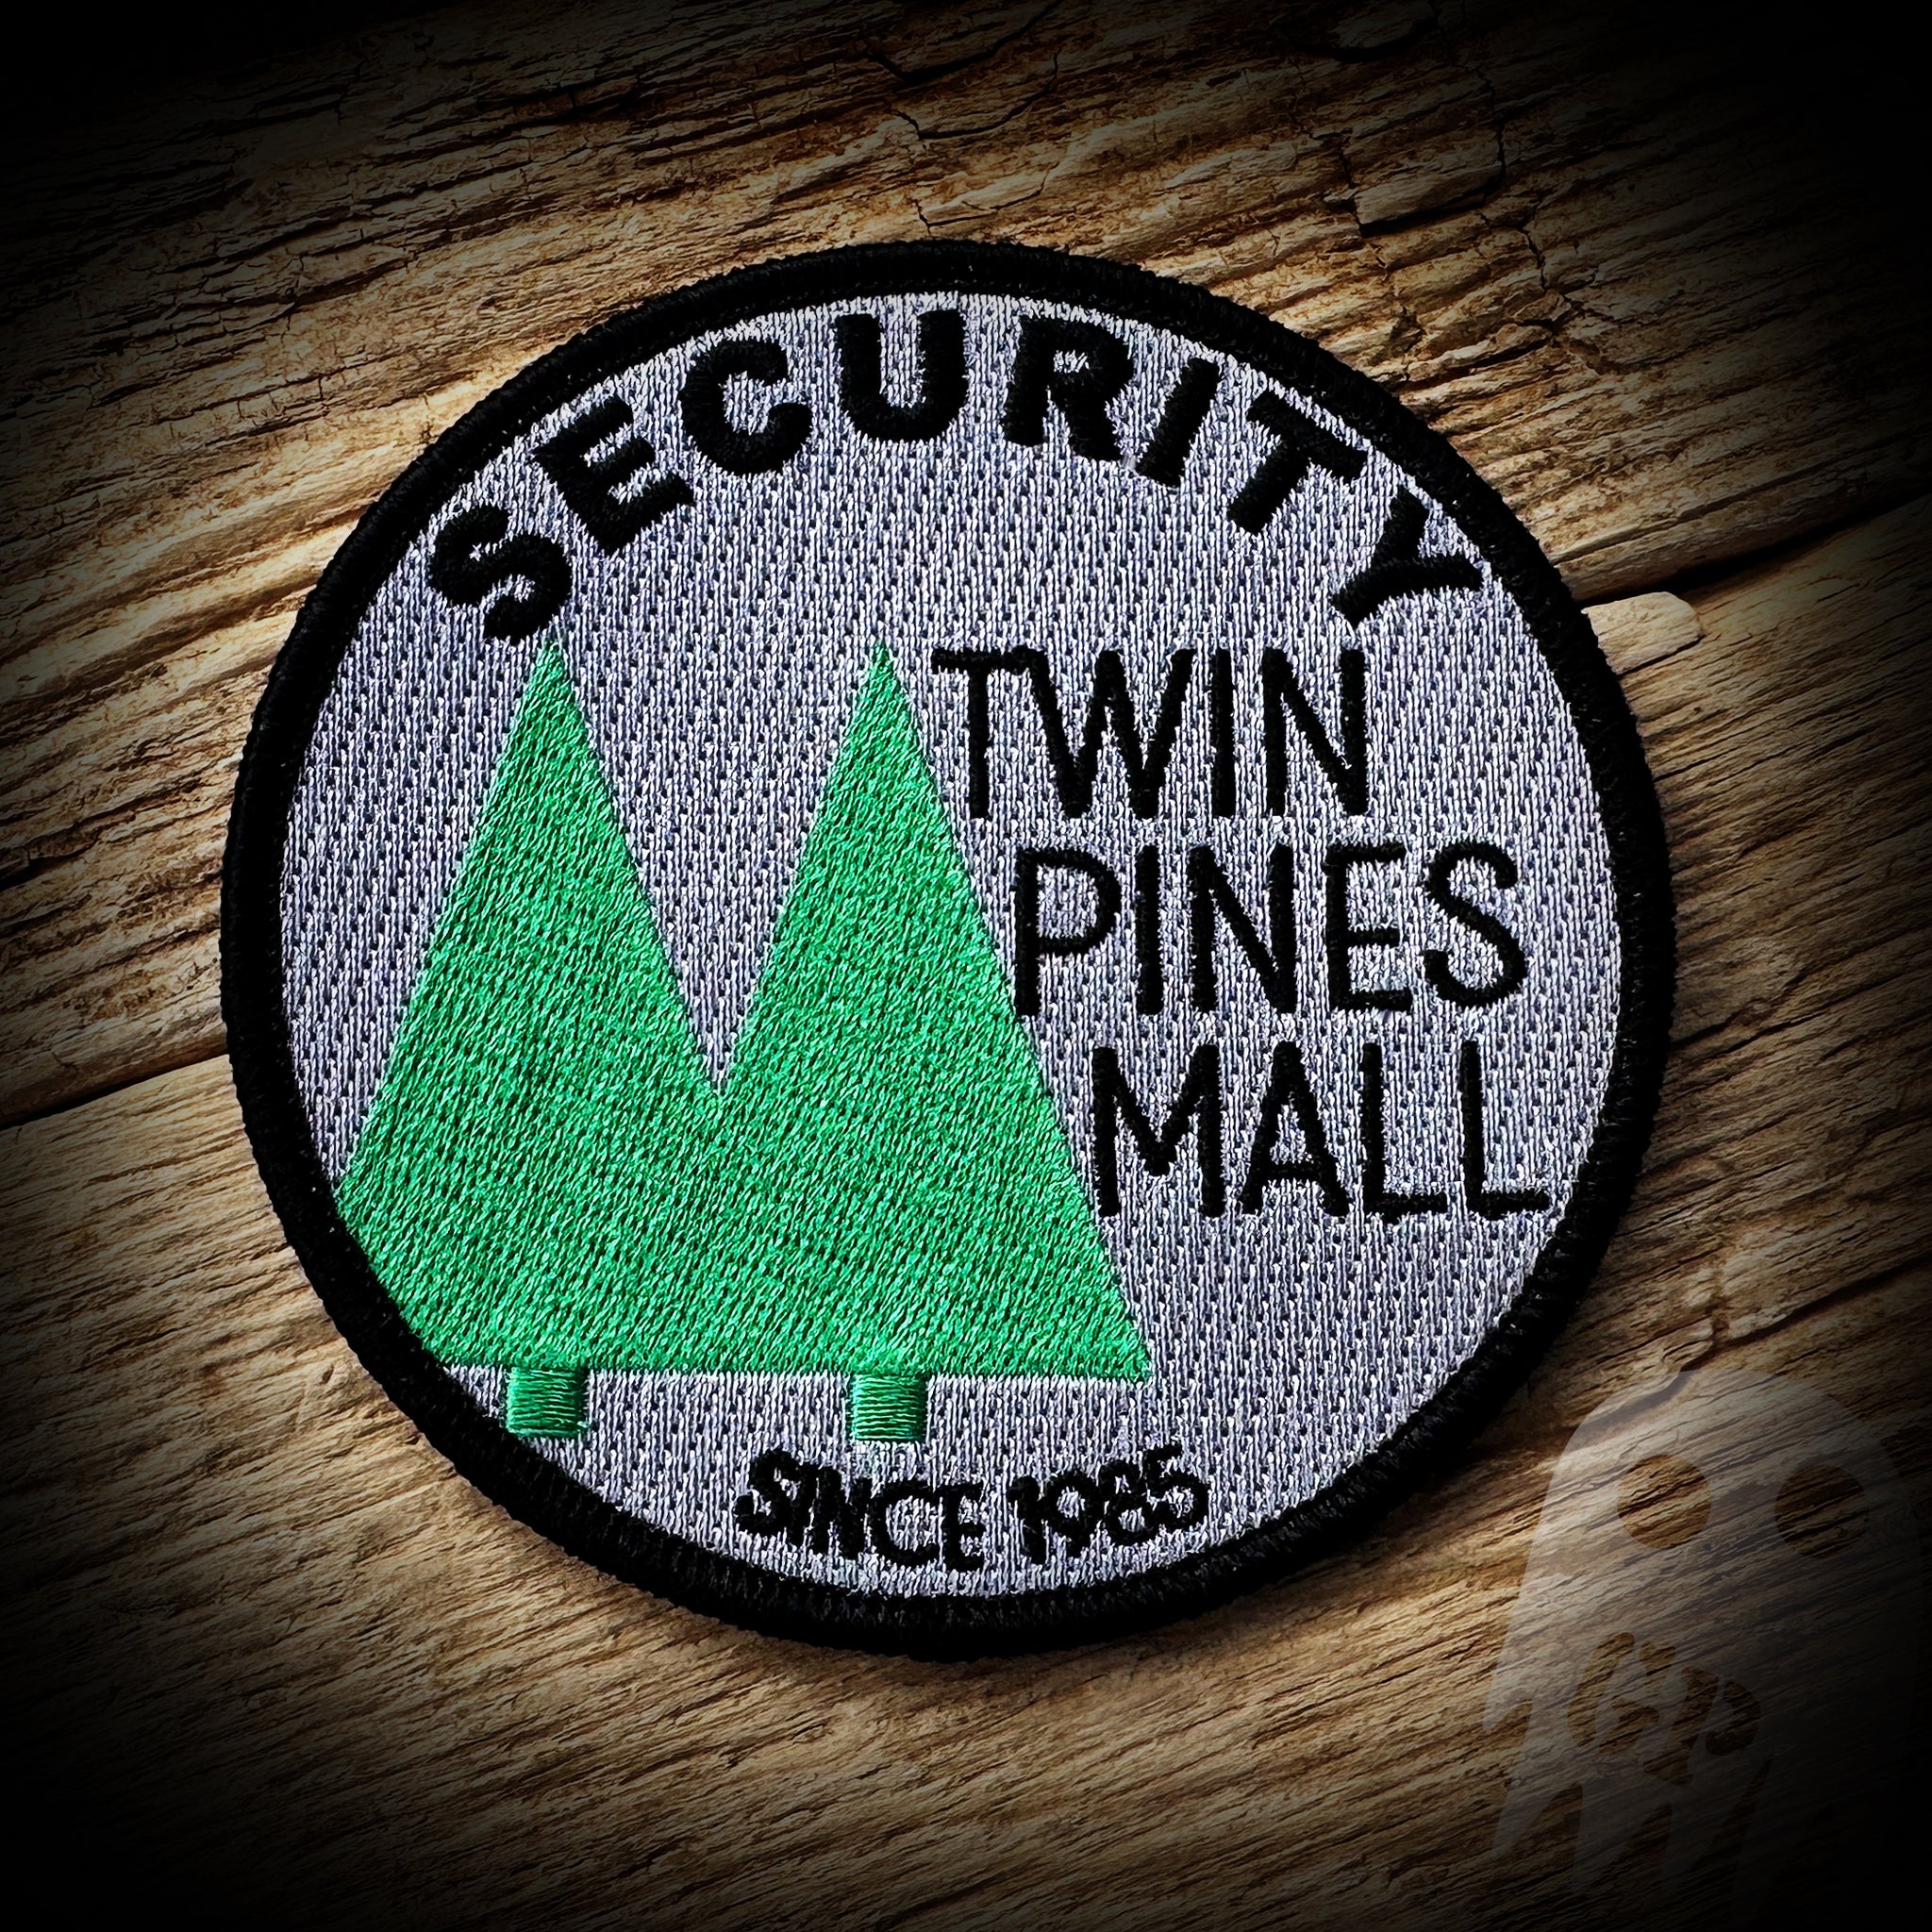 #55 Twin Pines Mall Security - Back to the Future